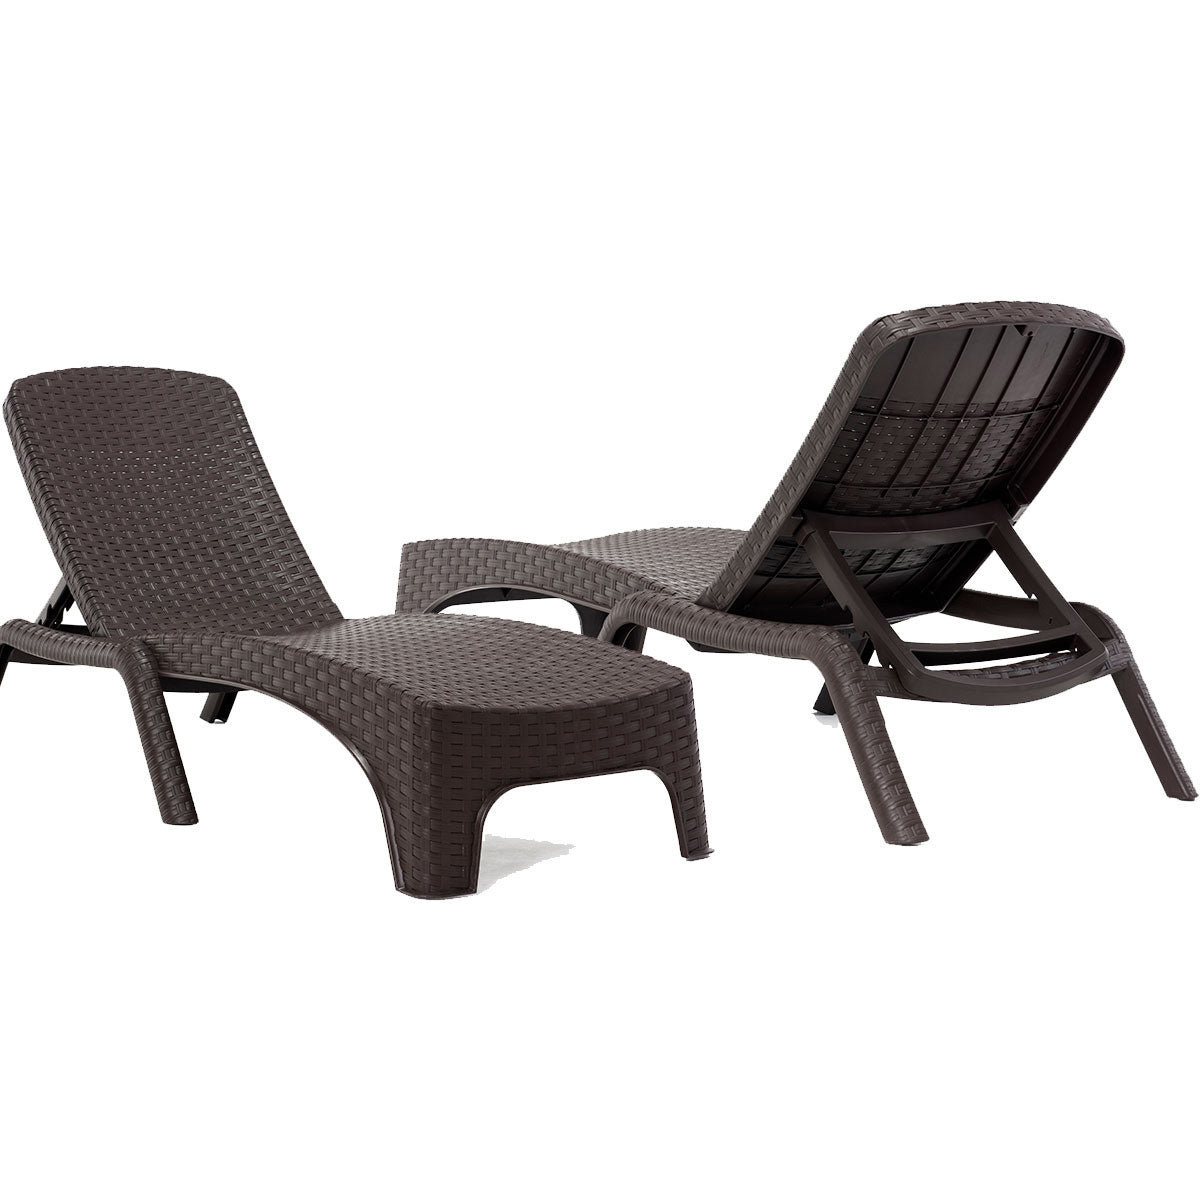 Rainbow Outdoor Roma Set of 2 Chaise Lounger-Brown